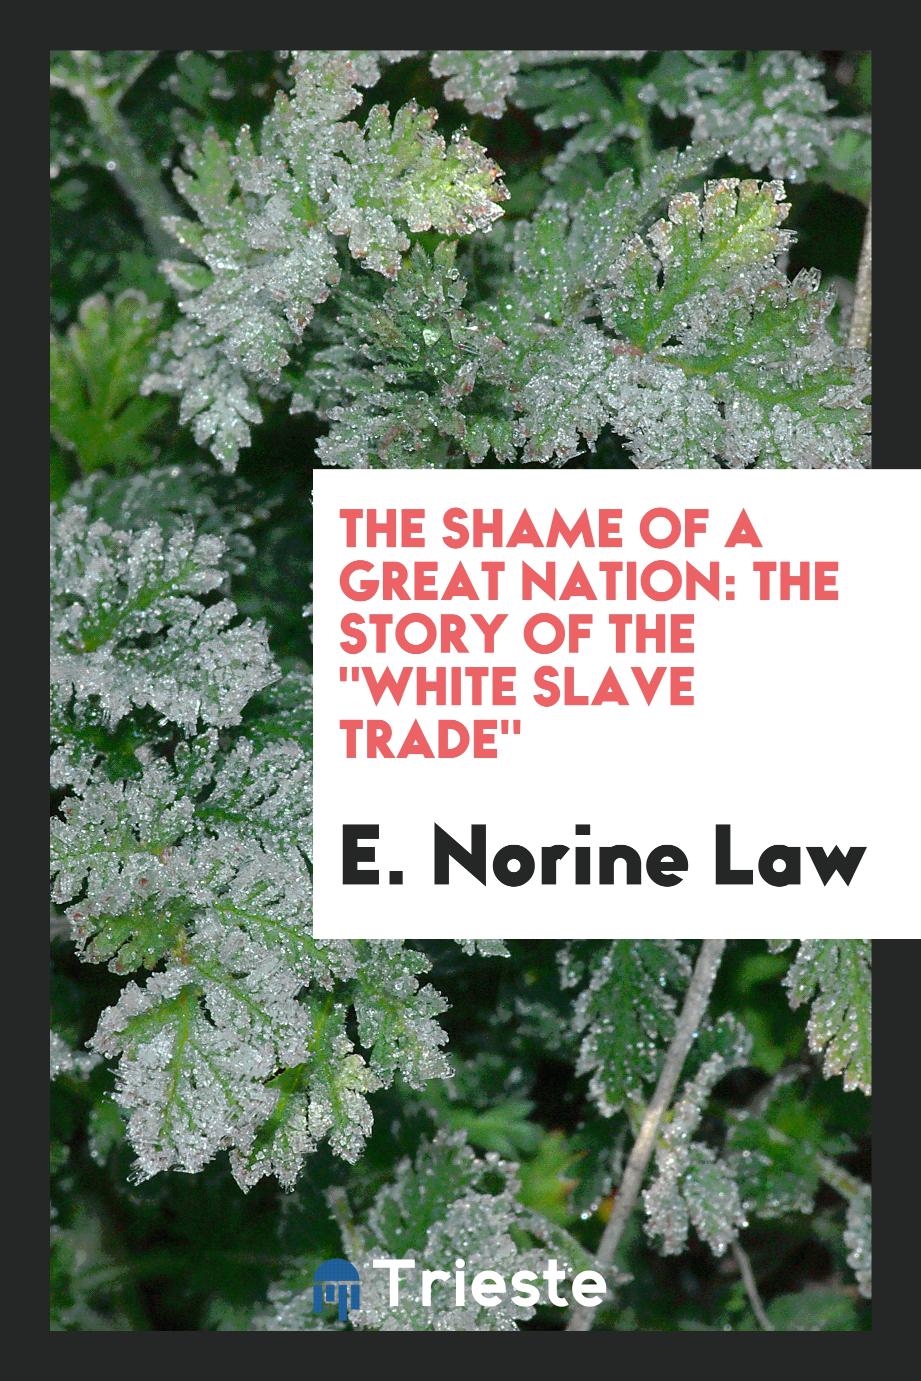 The shame of a great nation: the story of the "white slave trade"